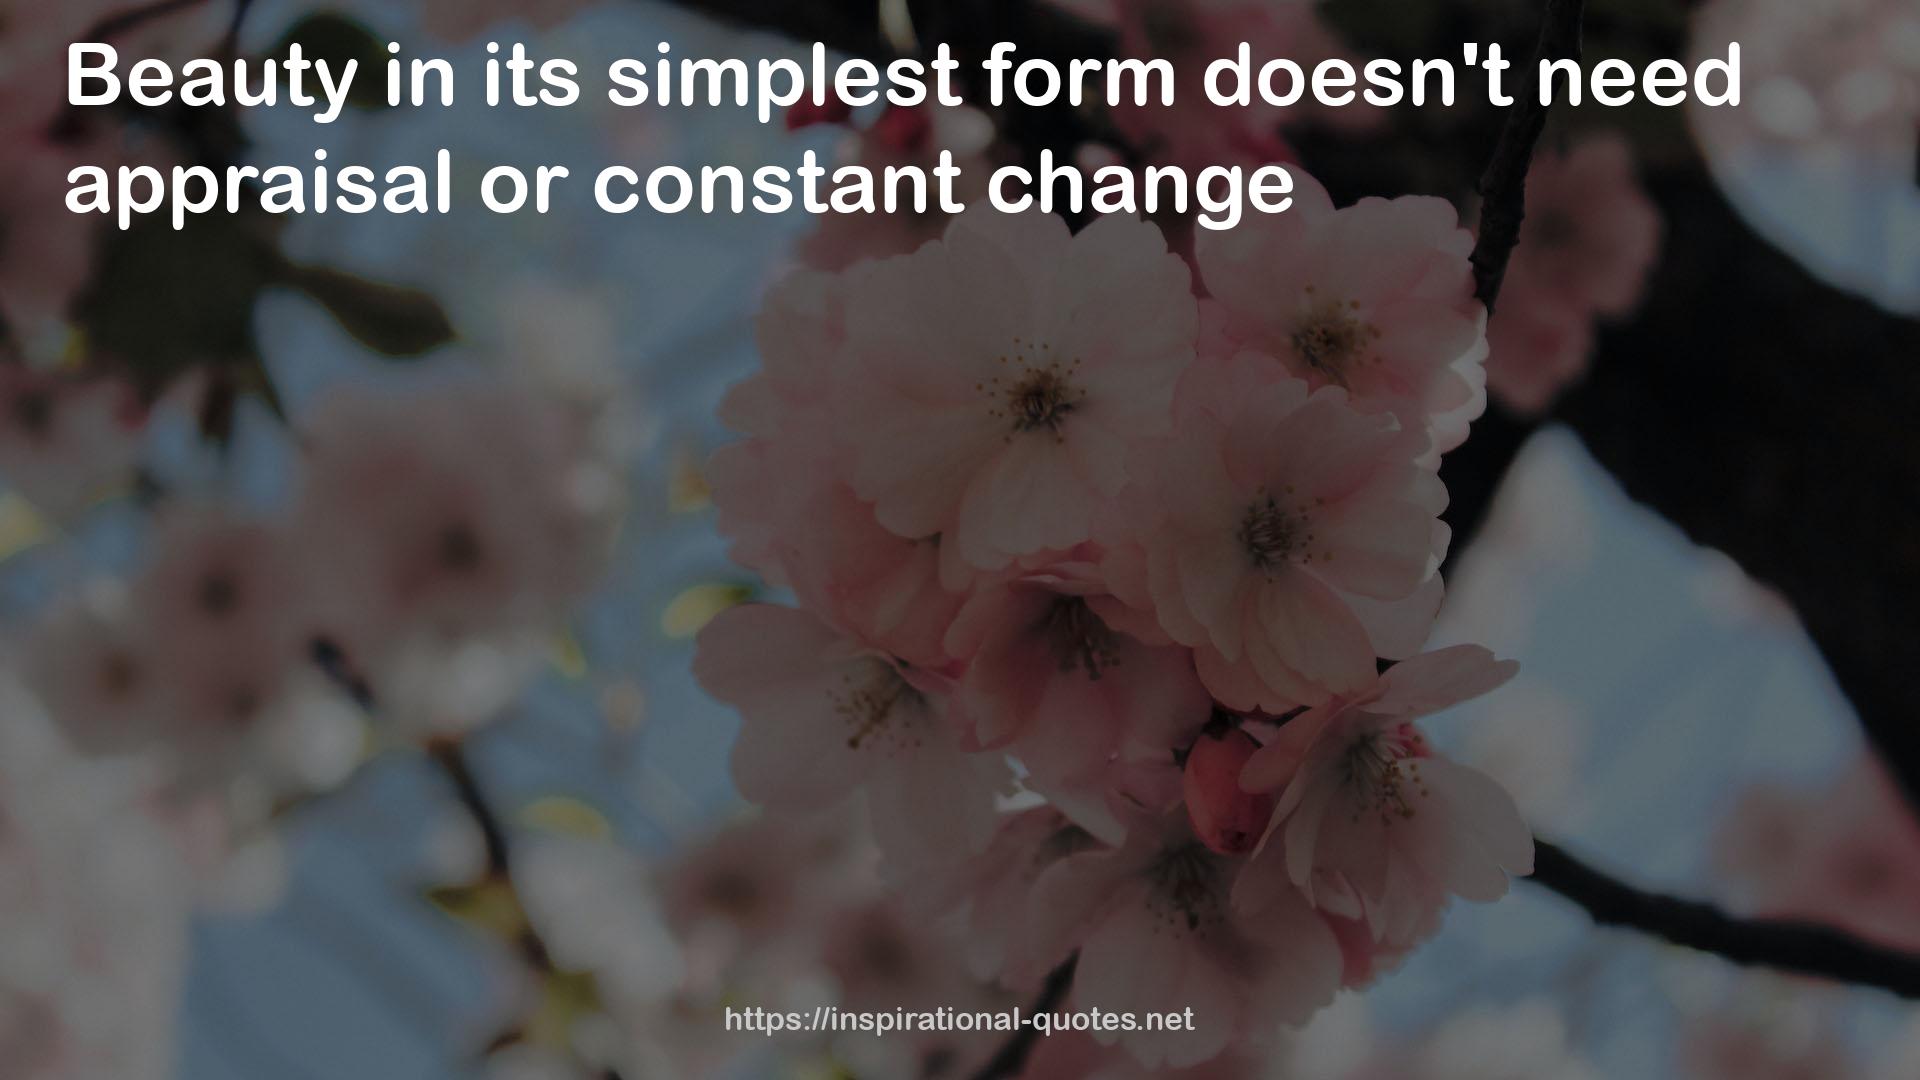 its simplest form  QUOTES